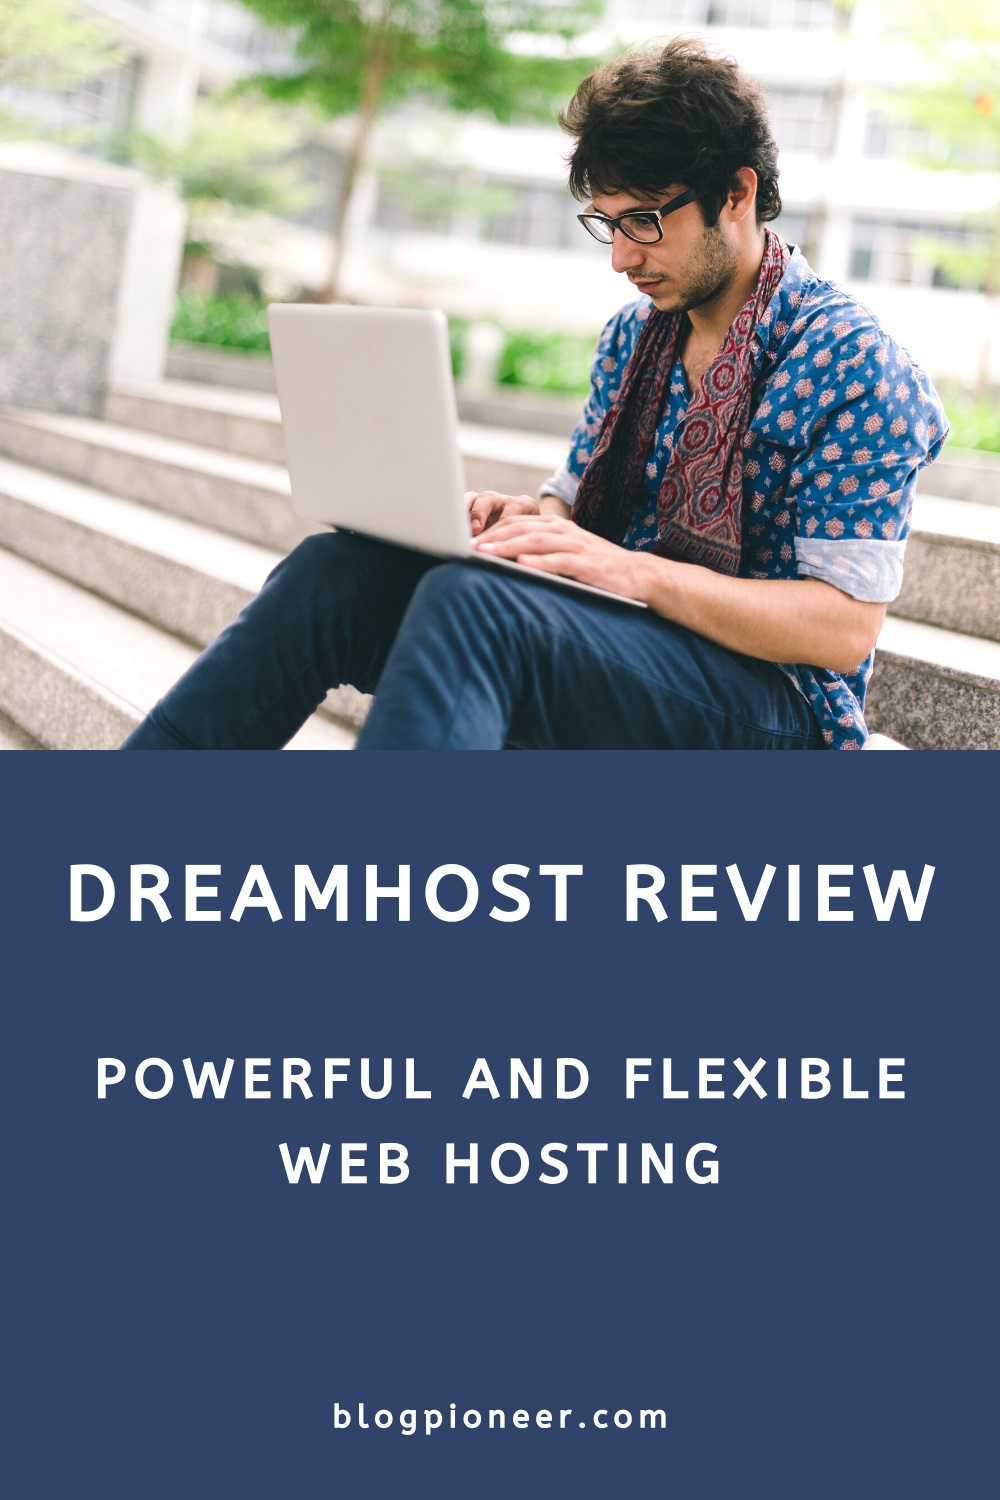 Review of DreamHost (powerful and flexible web hosting)